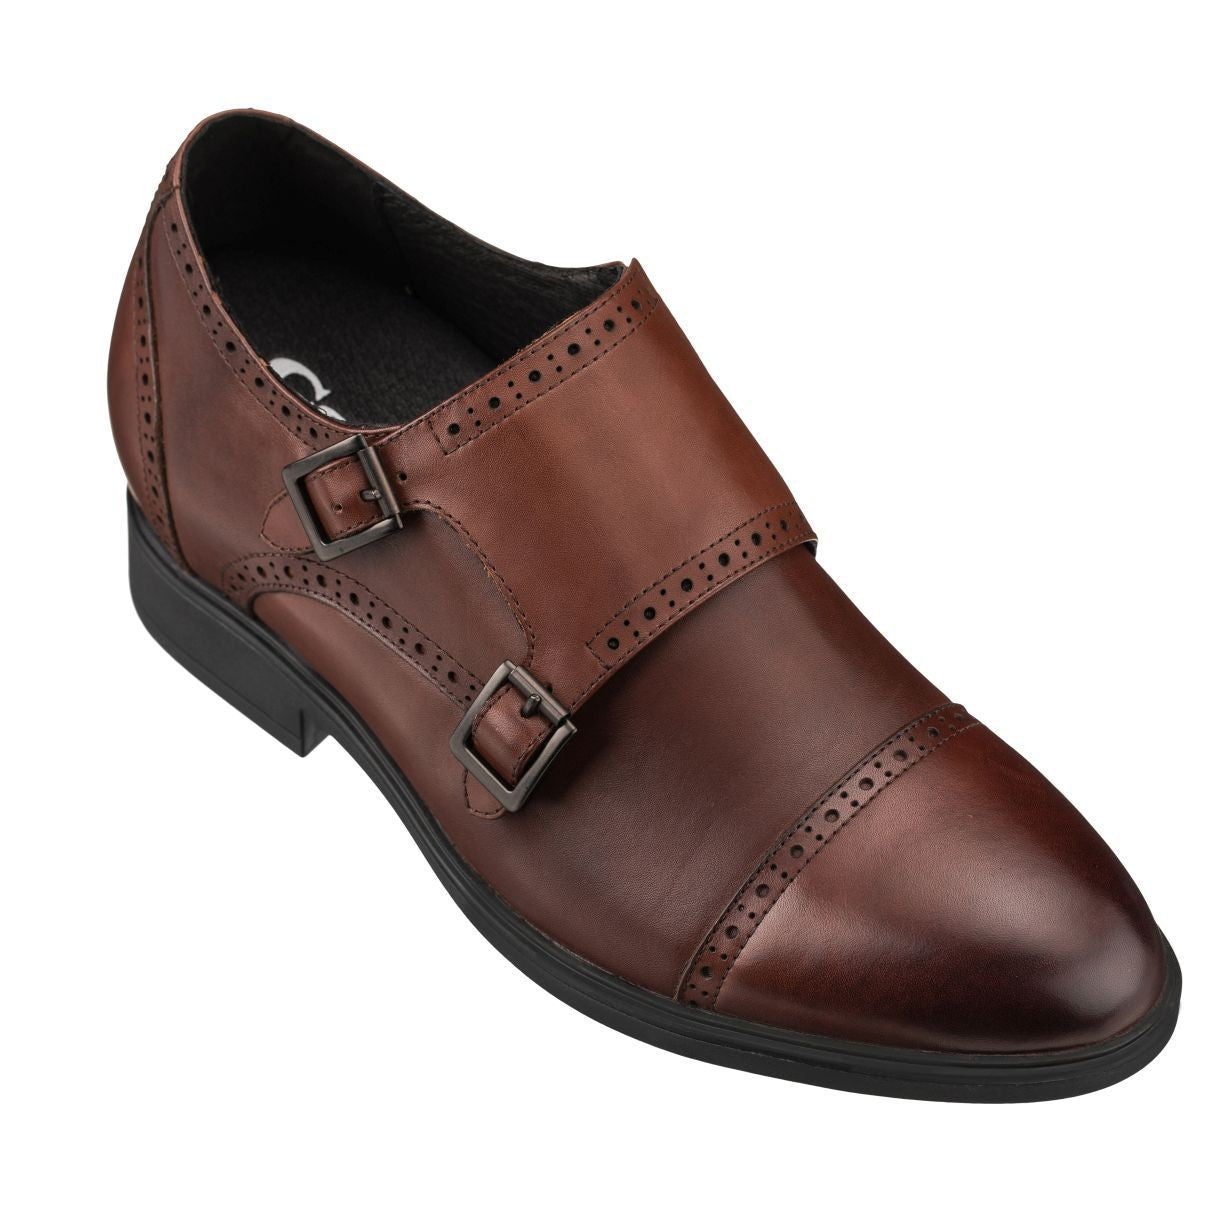 CALTO Dark Brown Leather Dress Shoes - 2.8 Inches - G65772